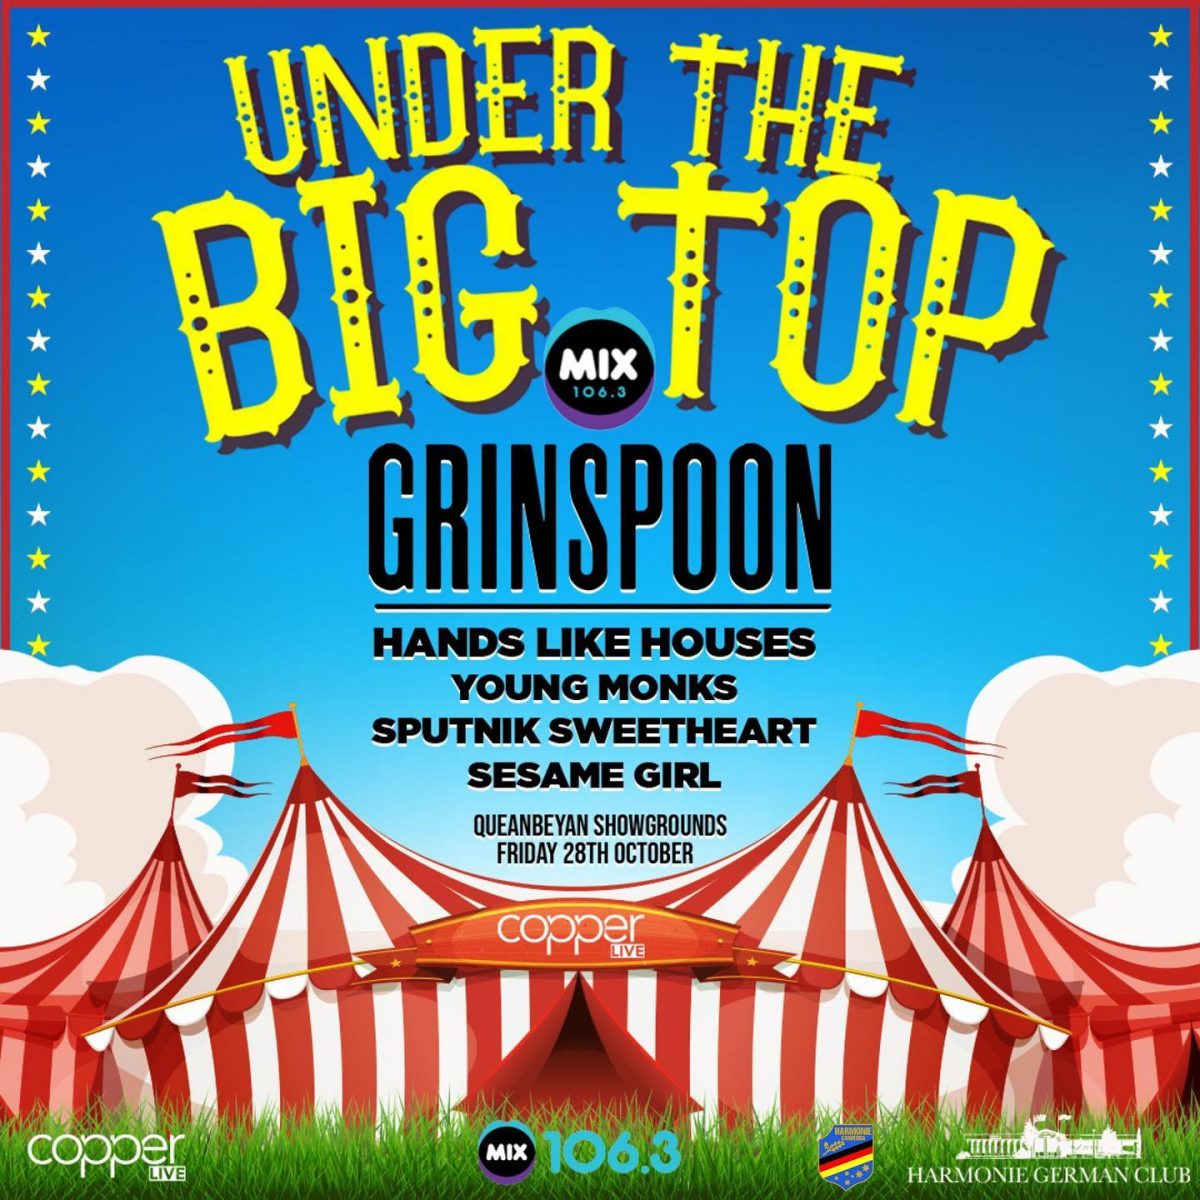 Flyer for Under the Big Top tour by Grinspoon